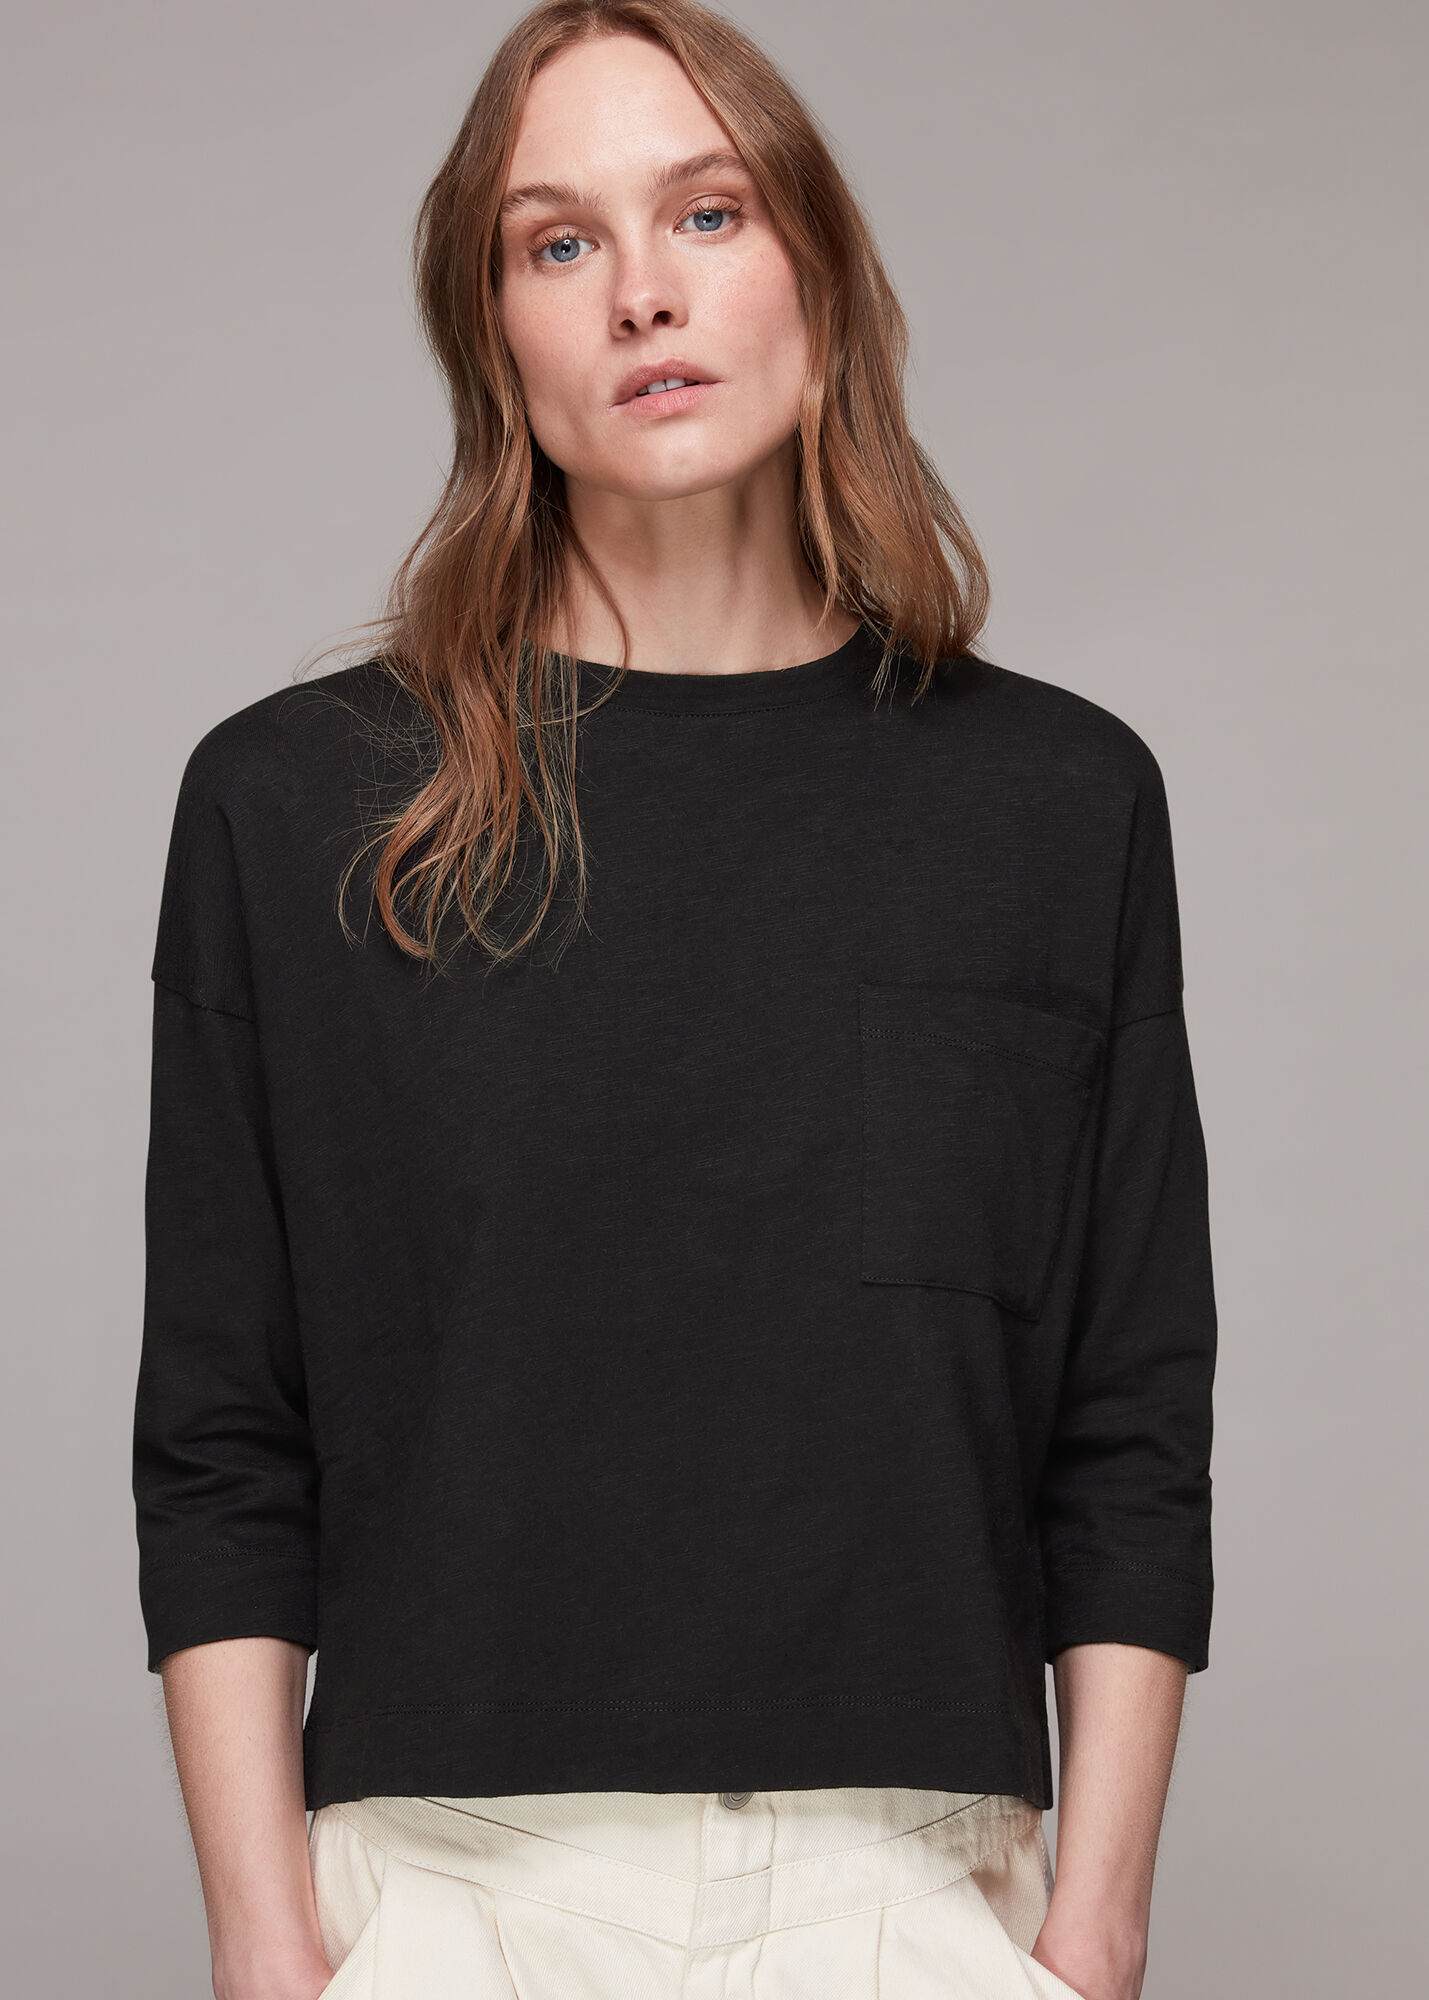 Black Long-Sleeve Top with Pocket | 100% Cotton | Whistles